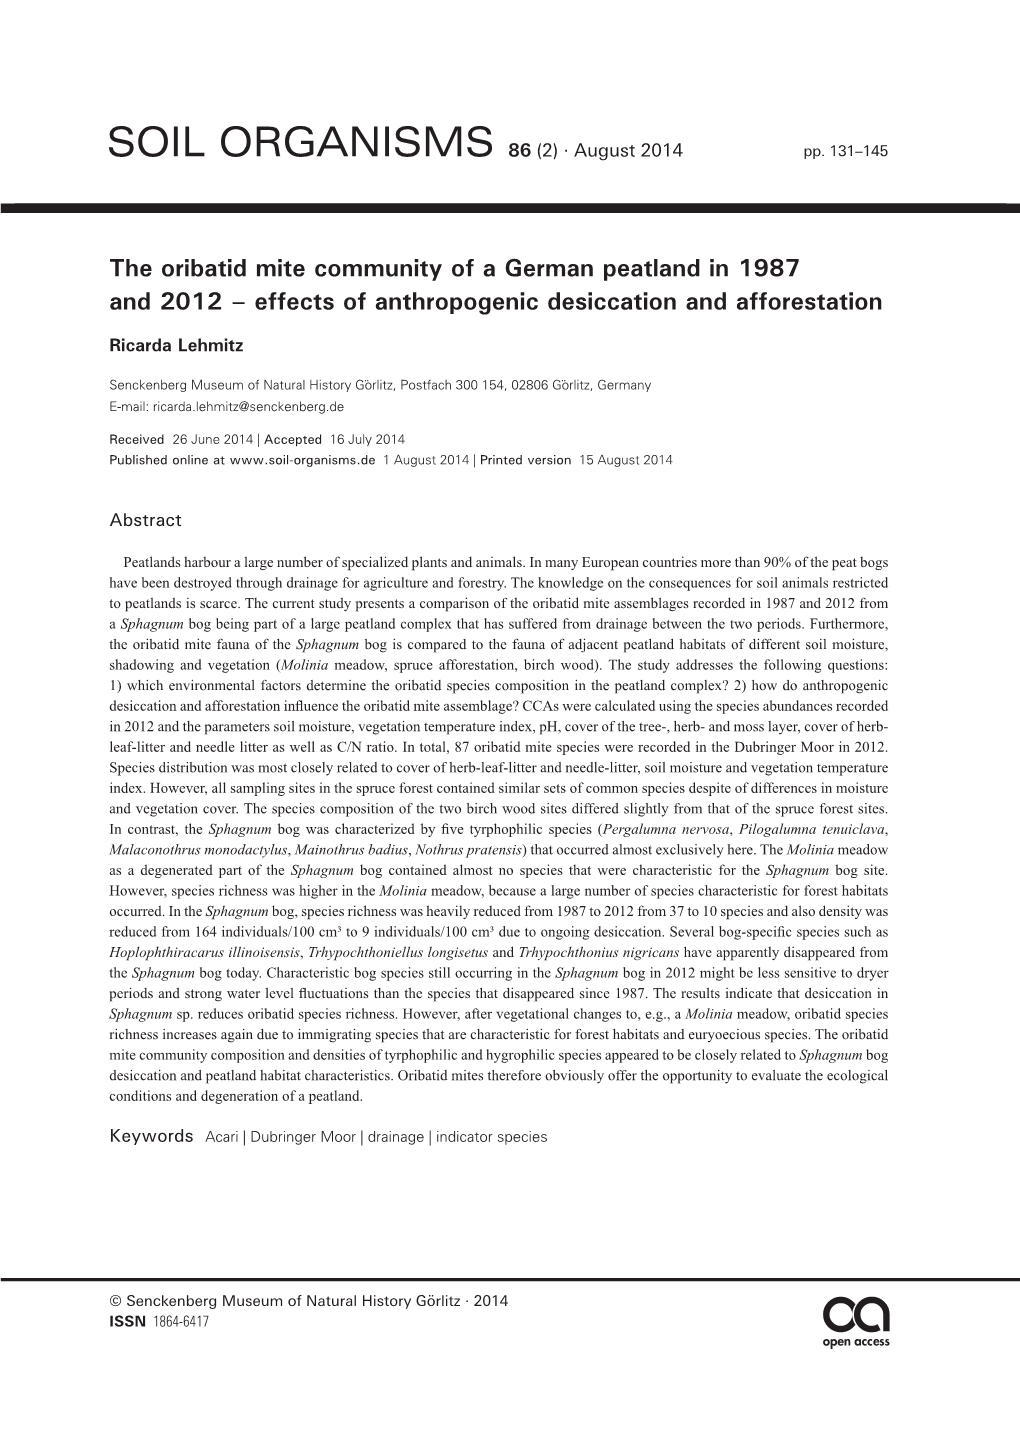 The Oribatid Mite Community of a German Peatland in 1987 and 2012 – Effects of Anthropogenic Desiccation and Afforestation